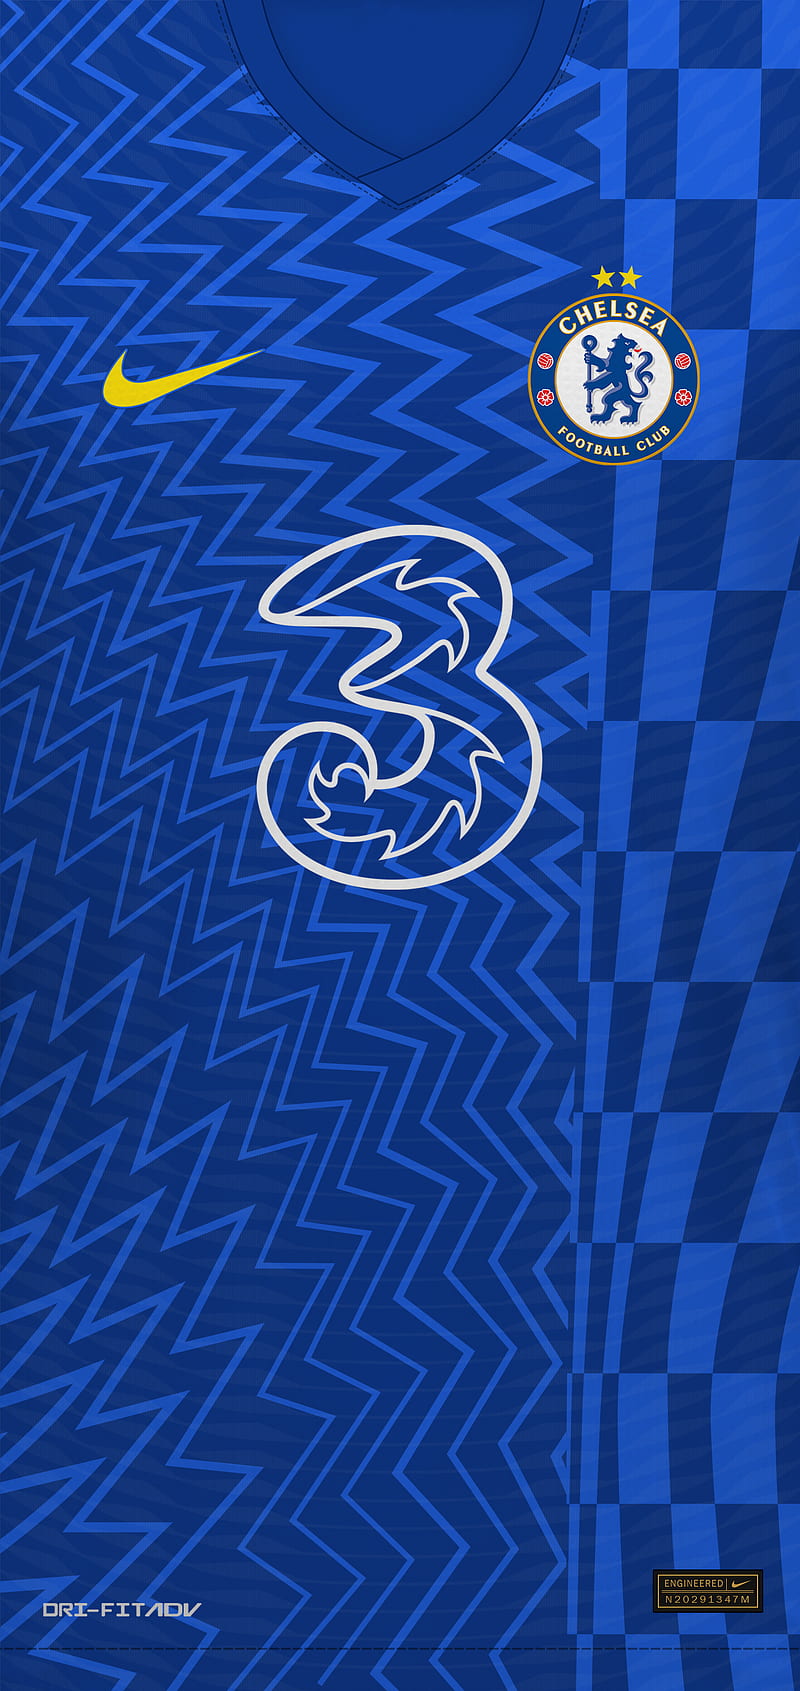 Live wallpaper Chelsea football club / download from VSThemes